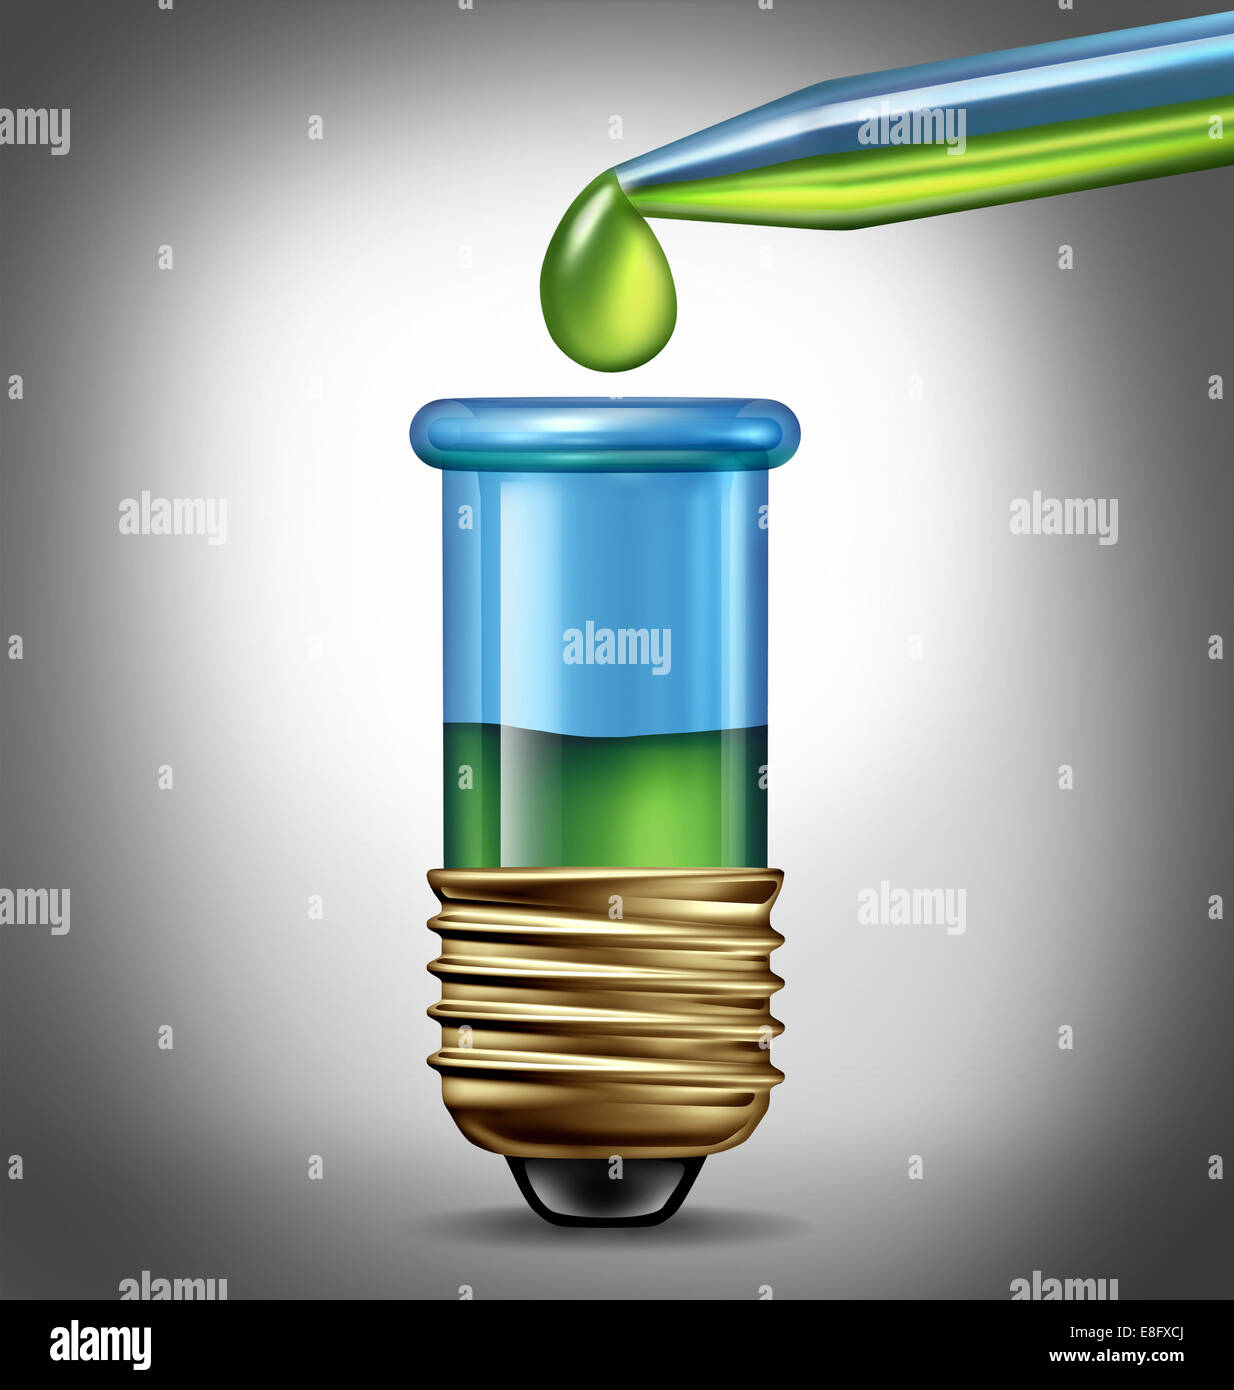 Scientific research Ideas as a biotechnology concept with a laboratory an eye dropper with green liquid and a test tube glass beaker shaped as a light bulb as a symbol of chemistry  discovery for new pharmaceutical development to fight disease. Stock Photo